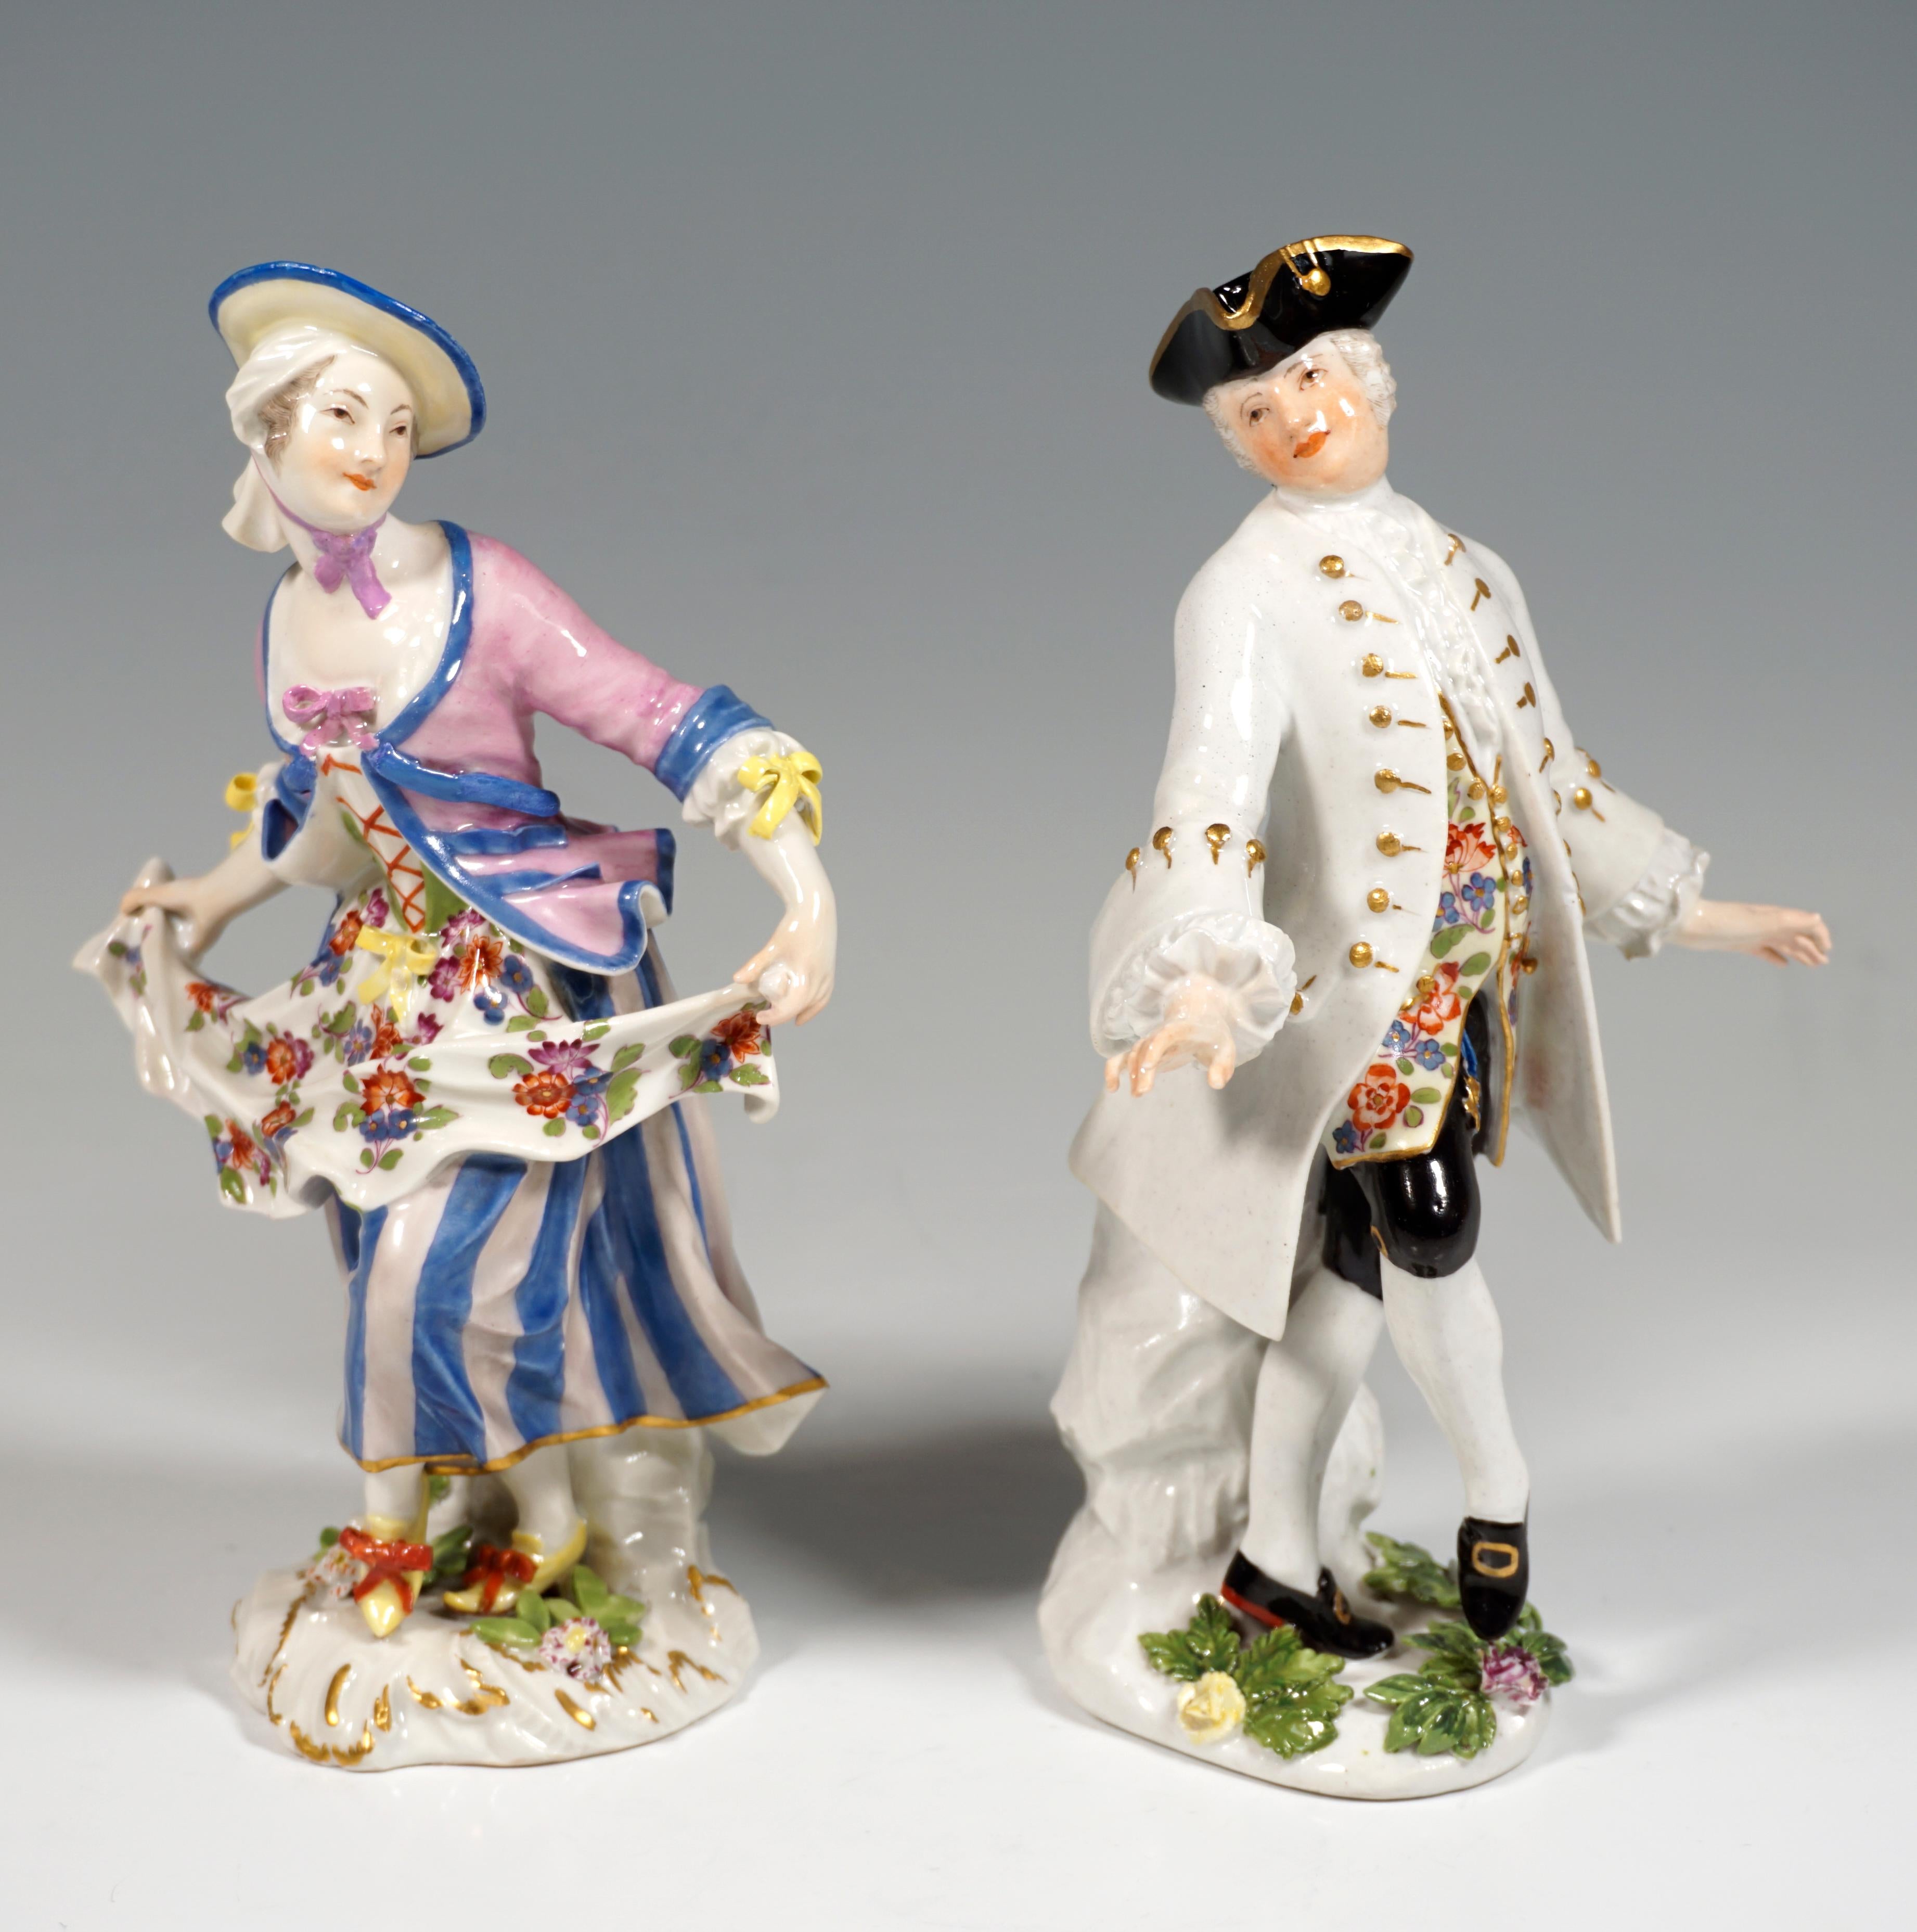 Rococo Pair of Very Early Meissen Figurines, Dance Couple, Germany, Around 1755